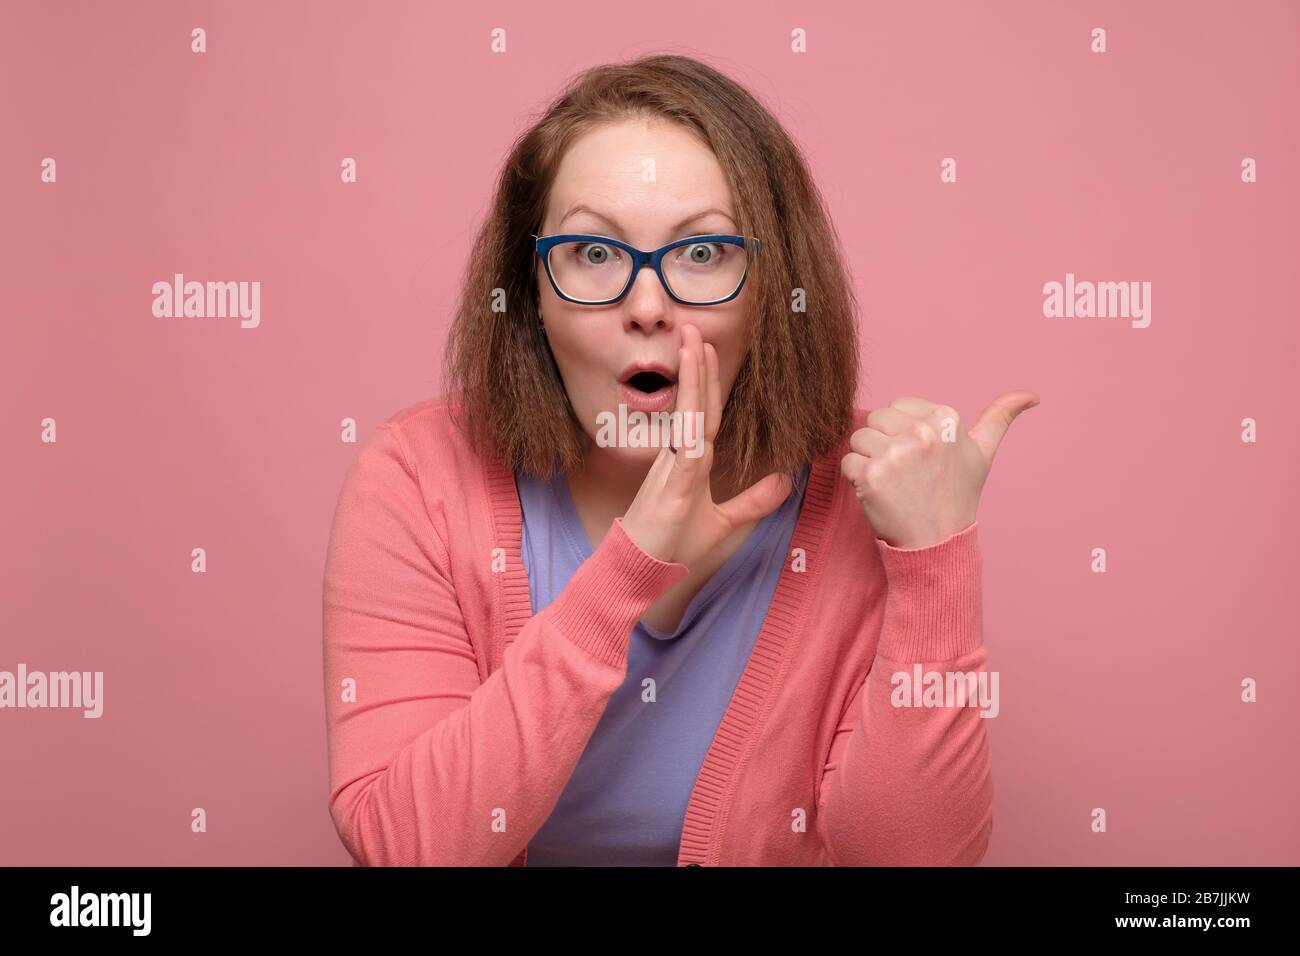 Caucasian young woman in glasses telling a secret against a pink background Stock Photo